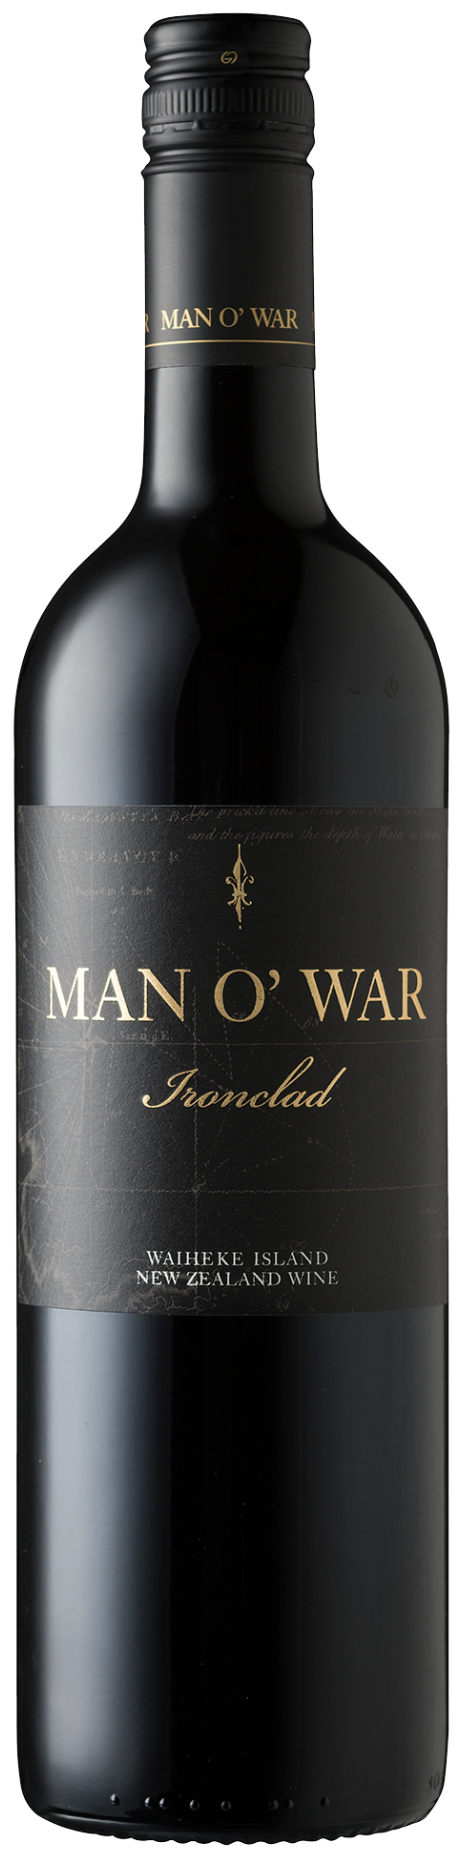 An image of a bottle of Man O' War Ironclad Waiheke Island, one of the nest NZ Bordeaux Blends